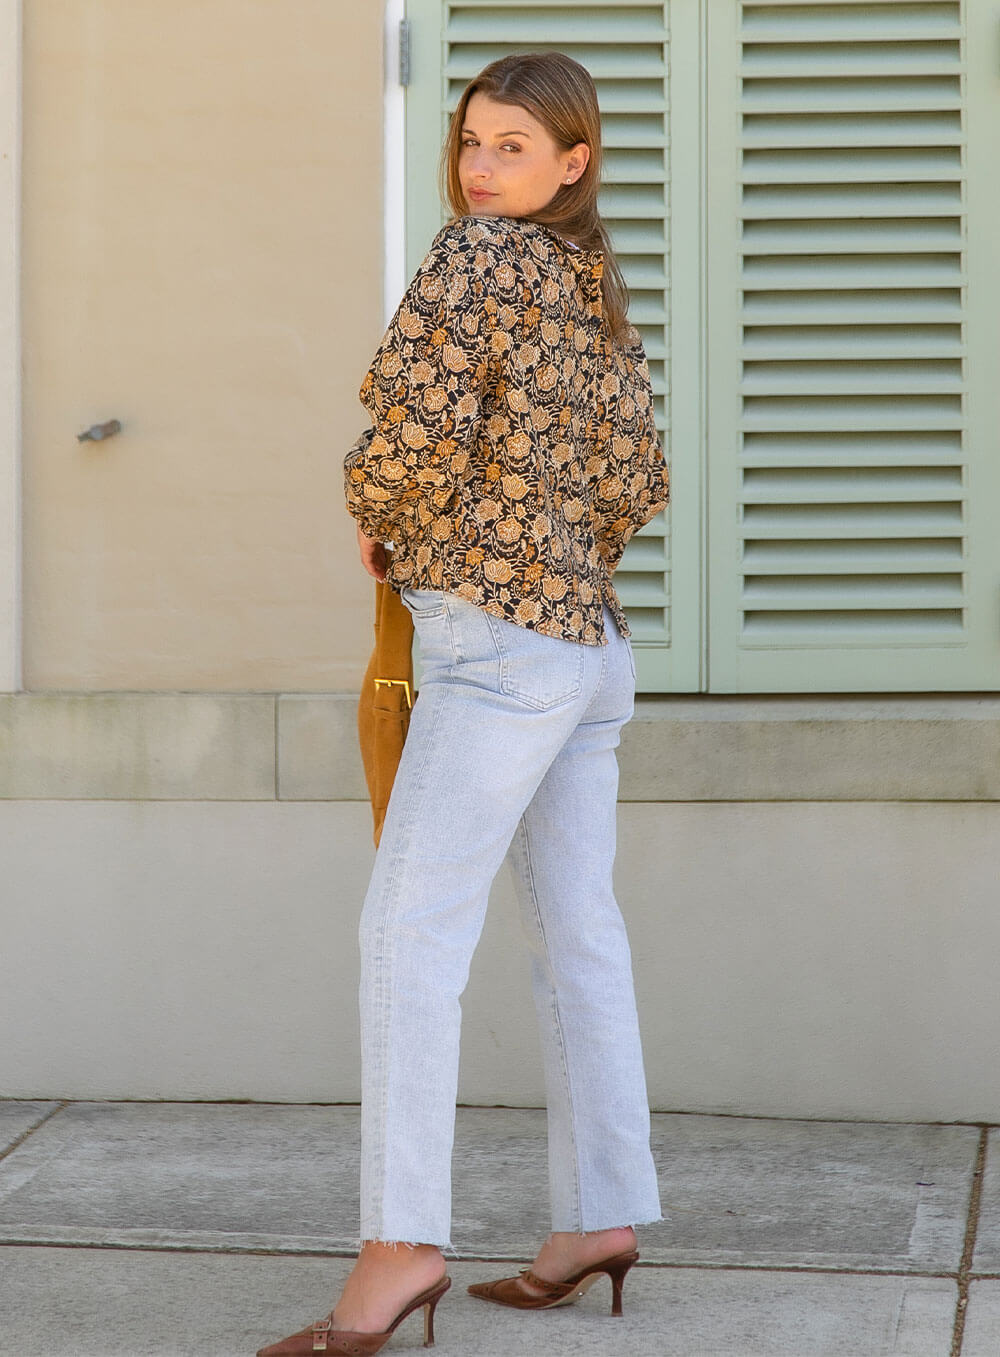 Tha Tiffany top in exclusive paisley black, tan, beige print features long sleeves with elasticised cuff, button through back yoke, shoulder detailing and breathable soft washed linen.